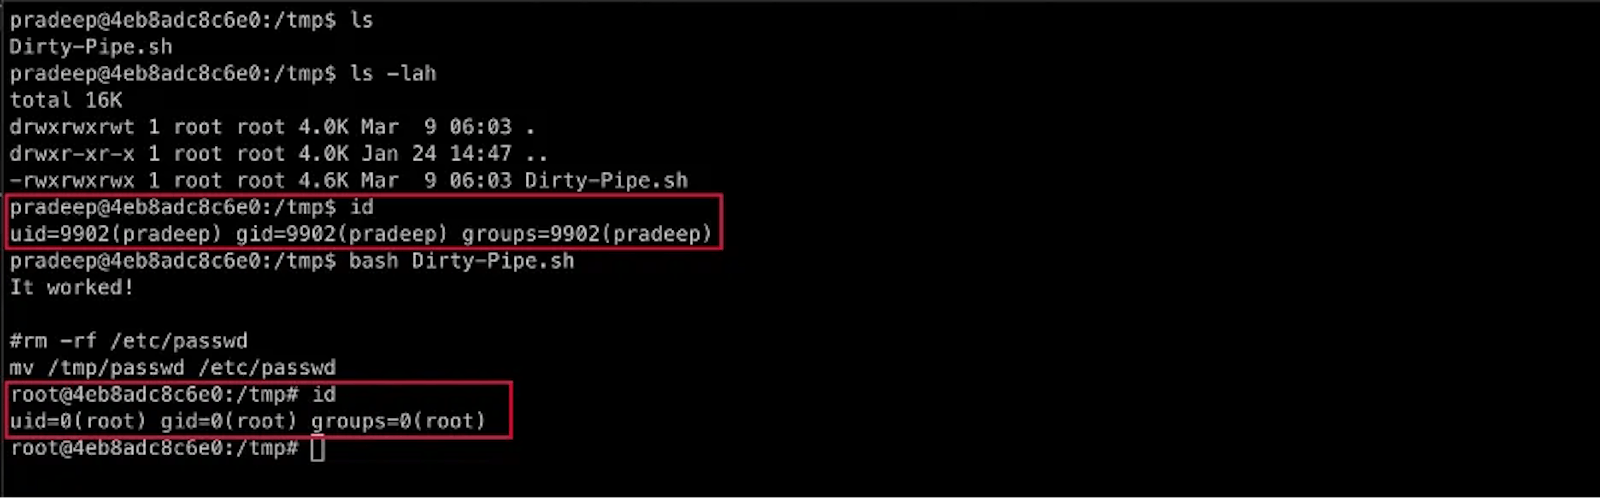 Dirty Pipe: A Critical Linux Kernel Vulnerability